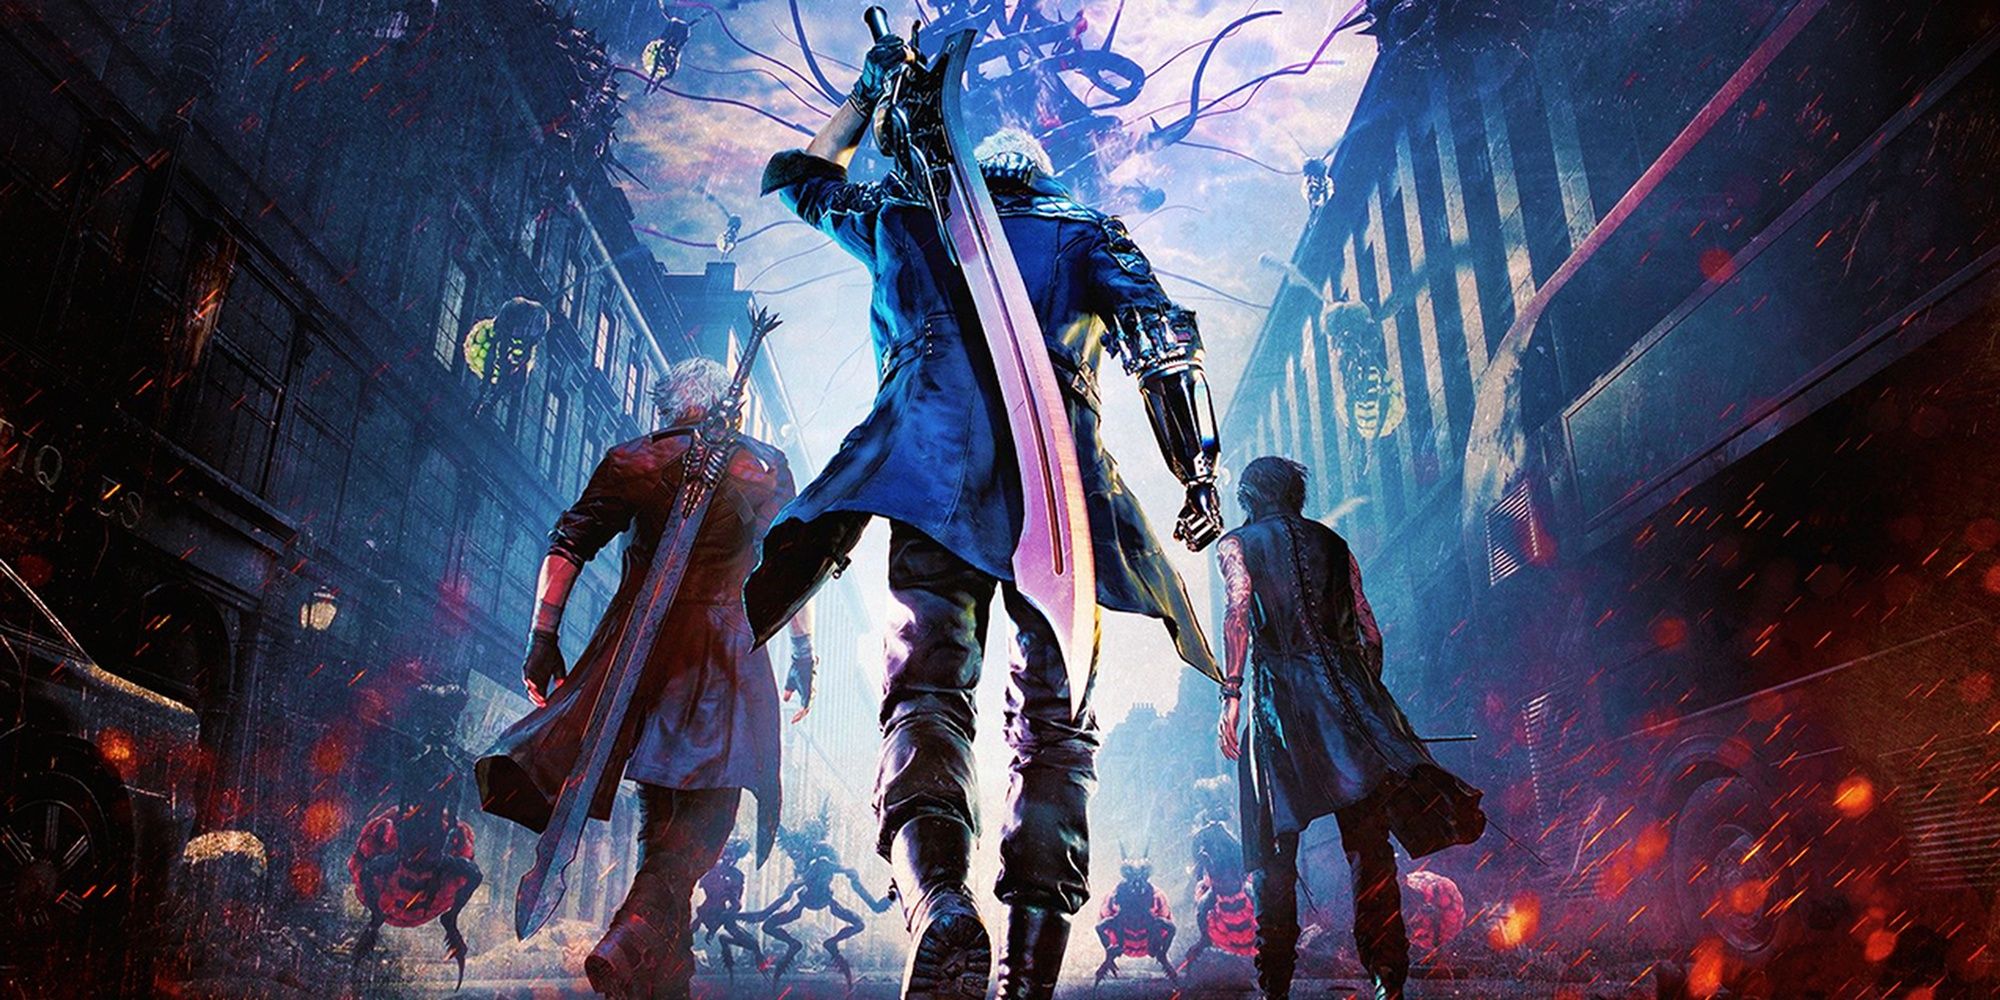 Nero, Dante and V from Devil May Cry 5